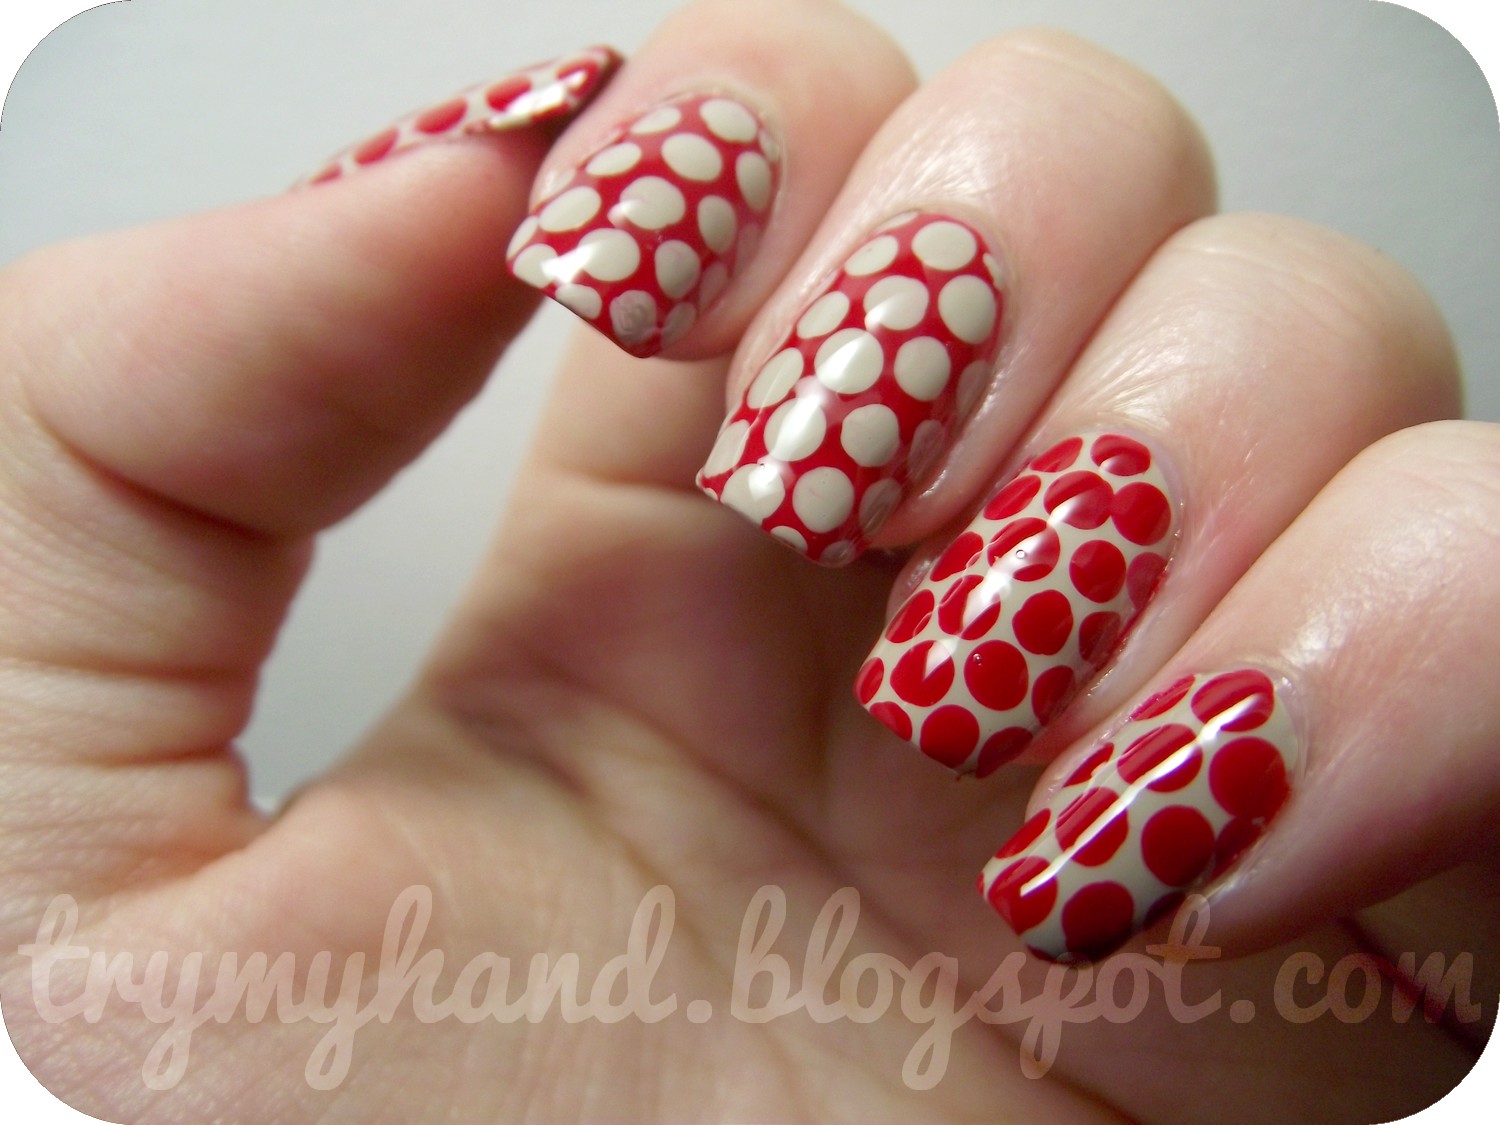 Try My Hand: 15 Day Nail Challenge Day 9 : Red Nails